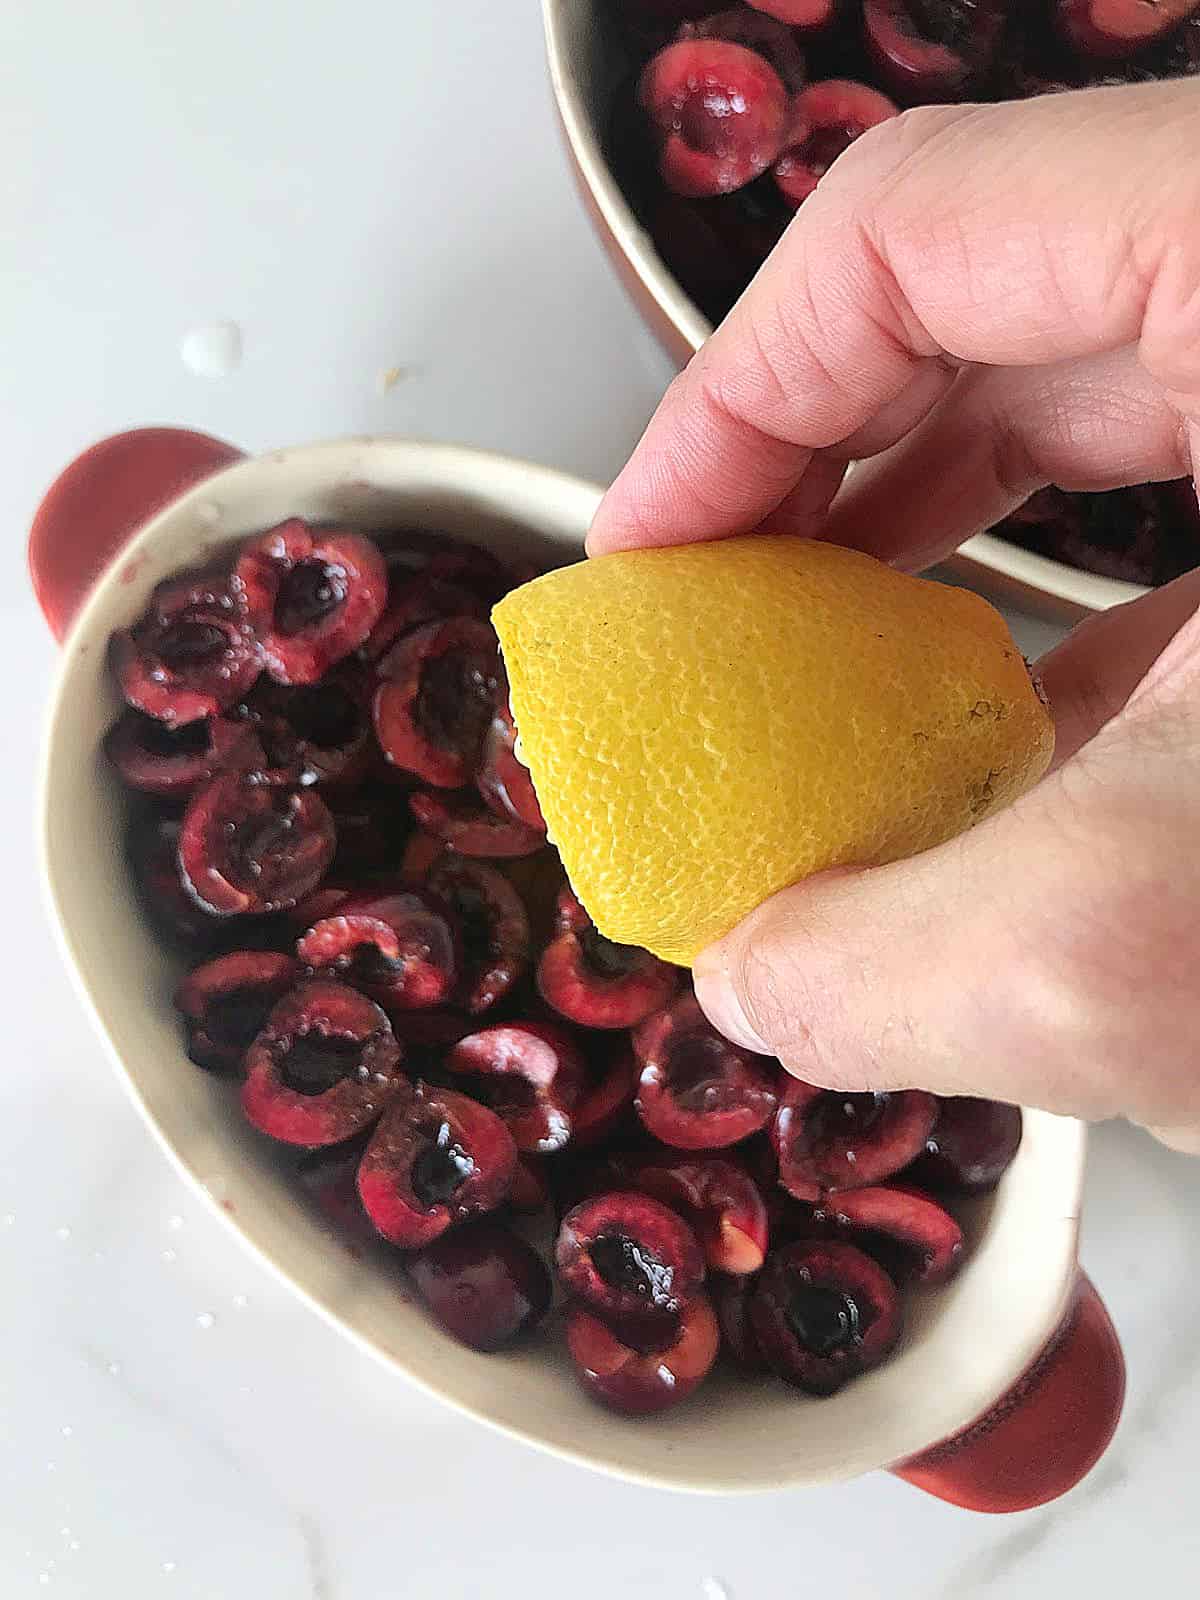 Adding lemon juice to fresh cherries in oval dish on white surface